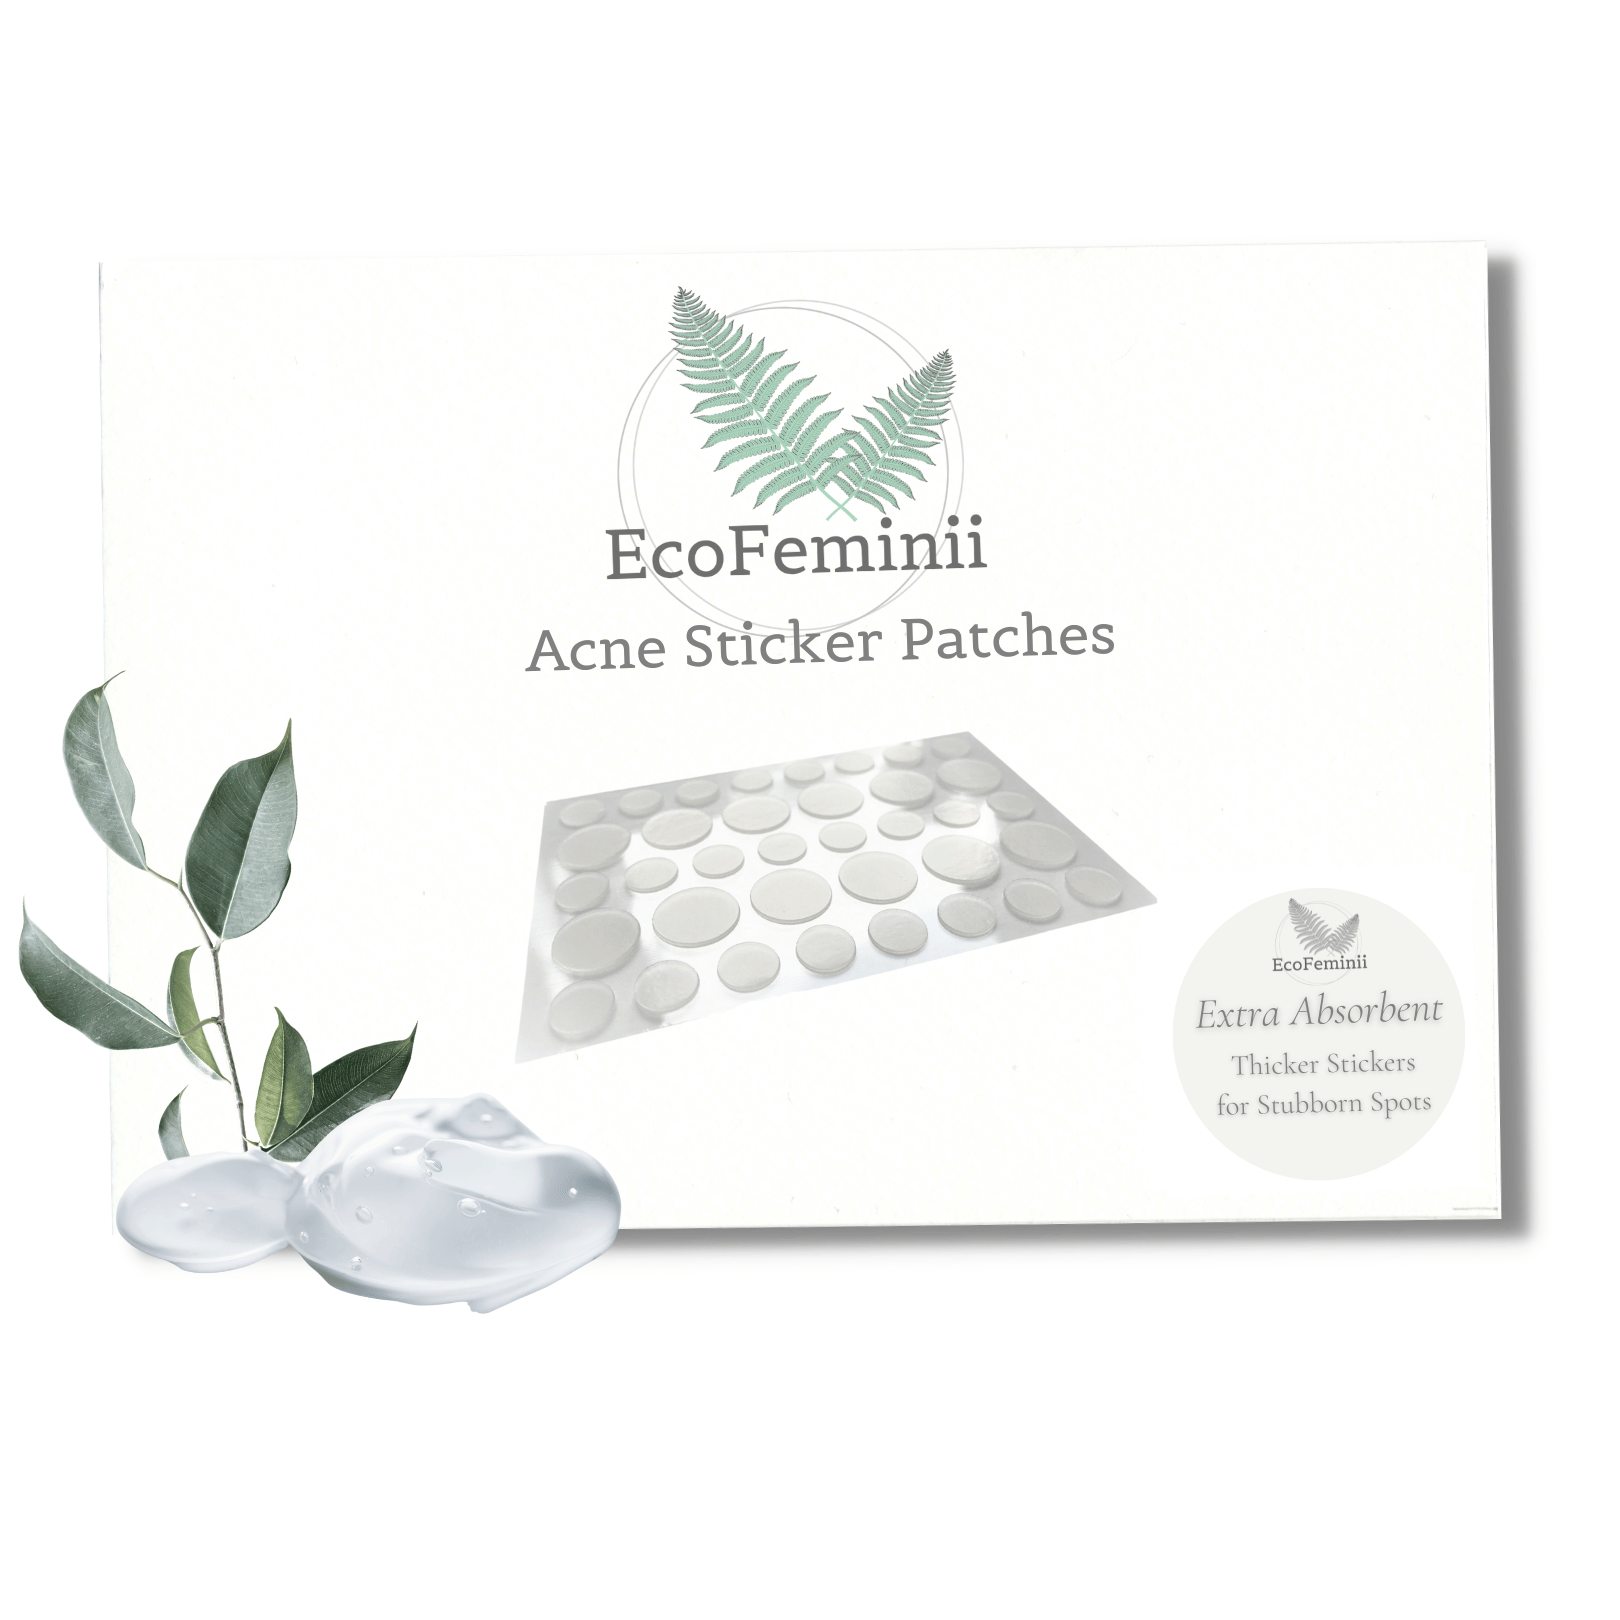  THIN, TRANSLUCENT & FLEXIBLE: EcoFeminii's original sticker patches can be worn discreetly as they are almost invisible on any skin tone. They effectively conceal the blemish and extract sebum overnight, making it easier to apply make-up the next day.